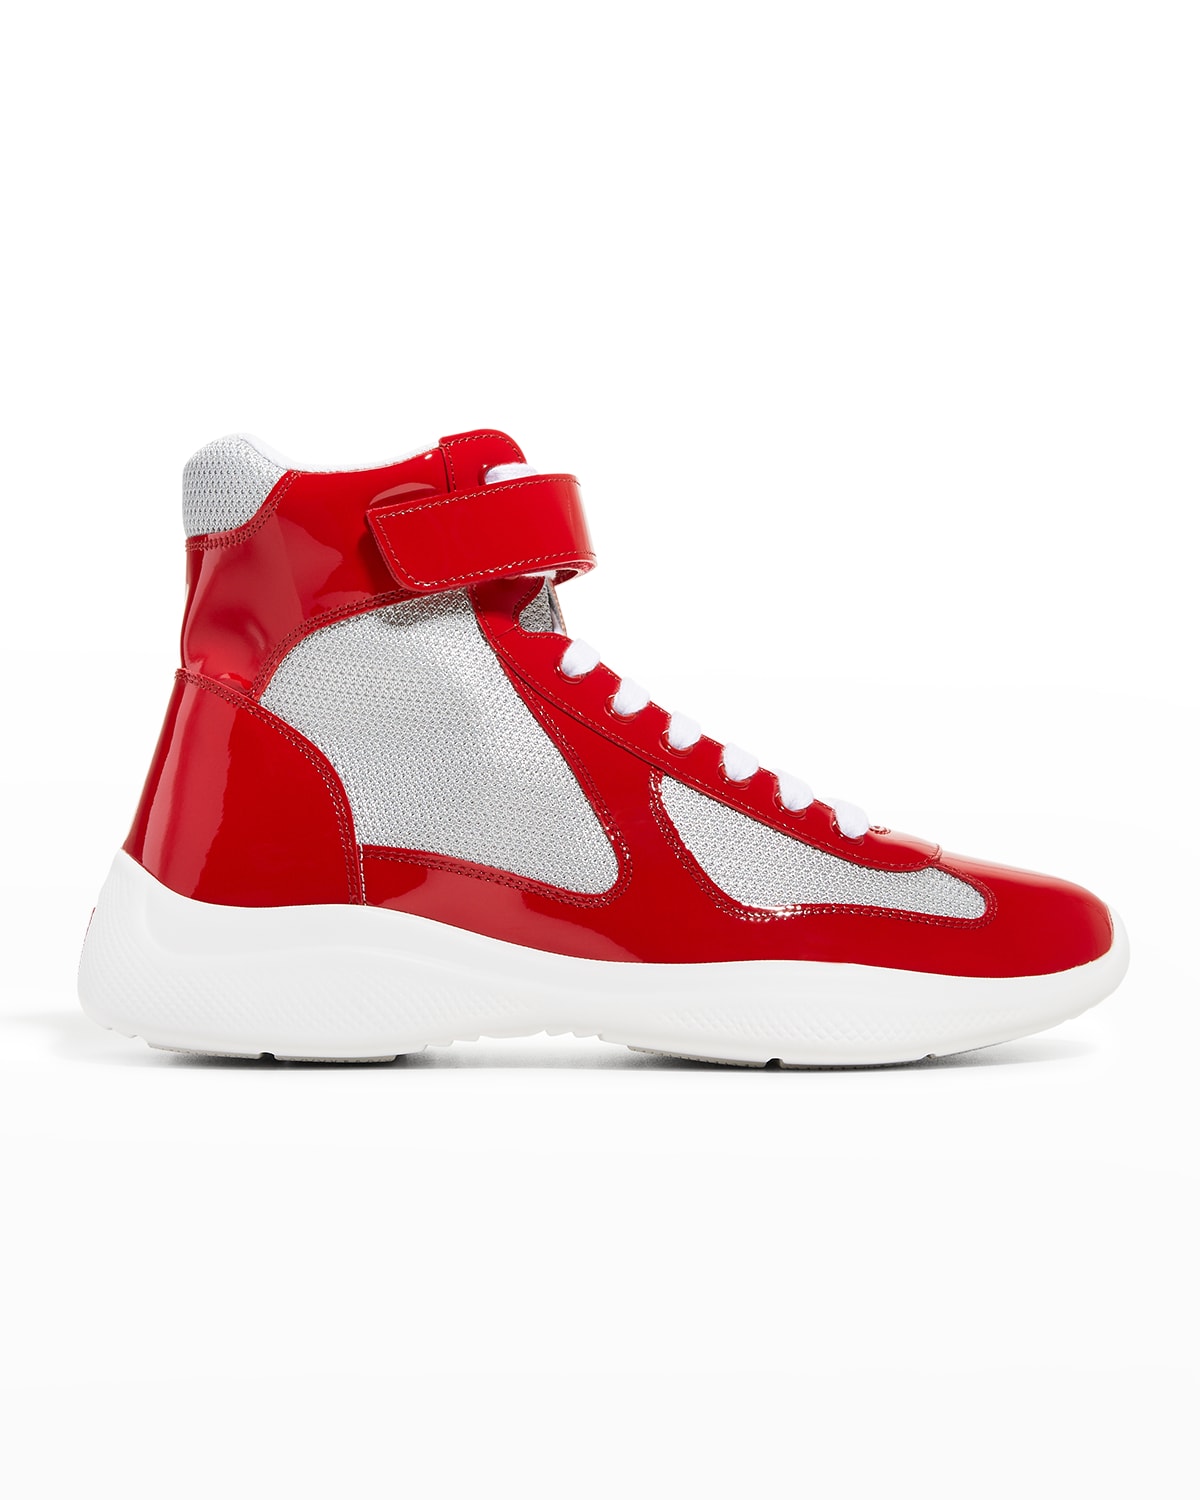 Men's America's Cup Patent Leather High-Top Sneakers